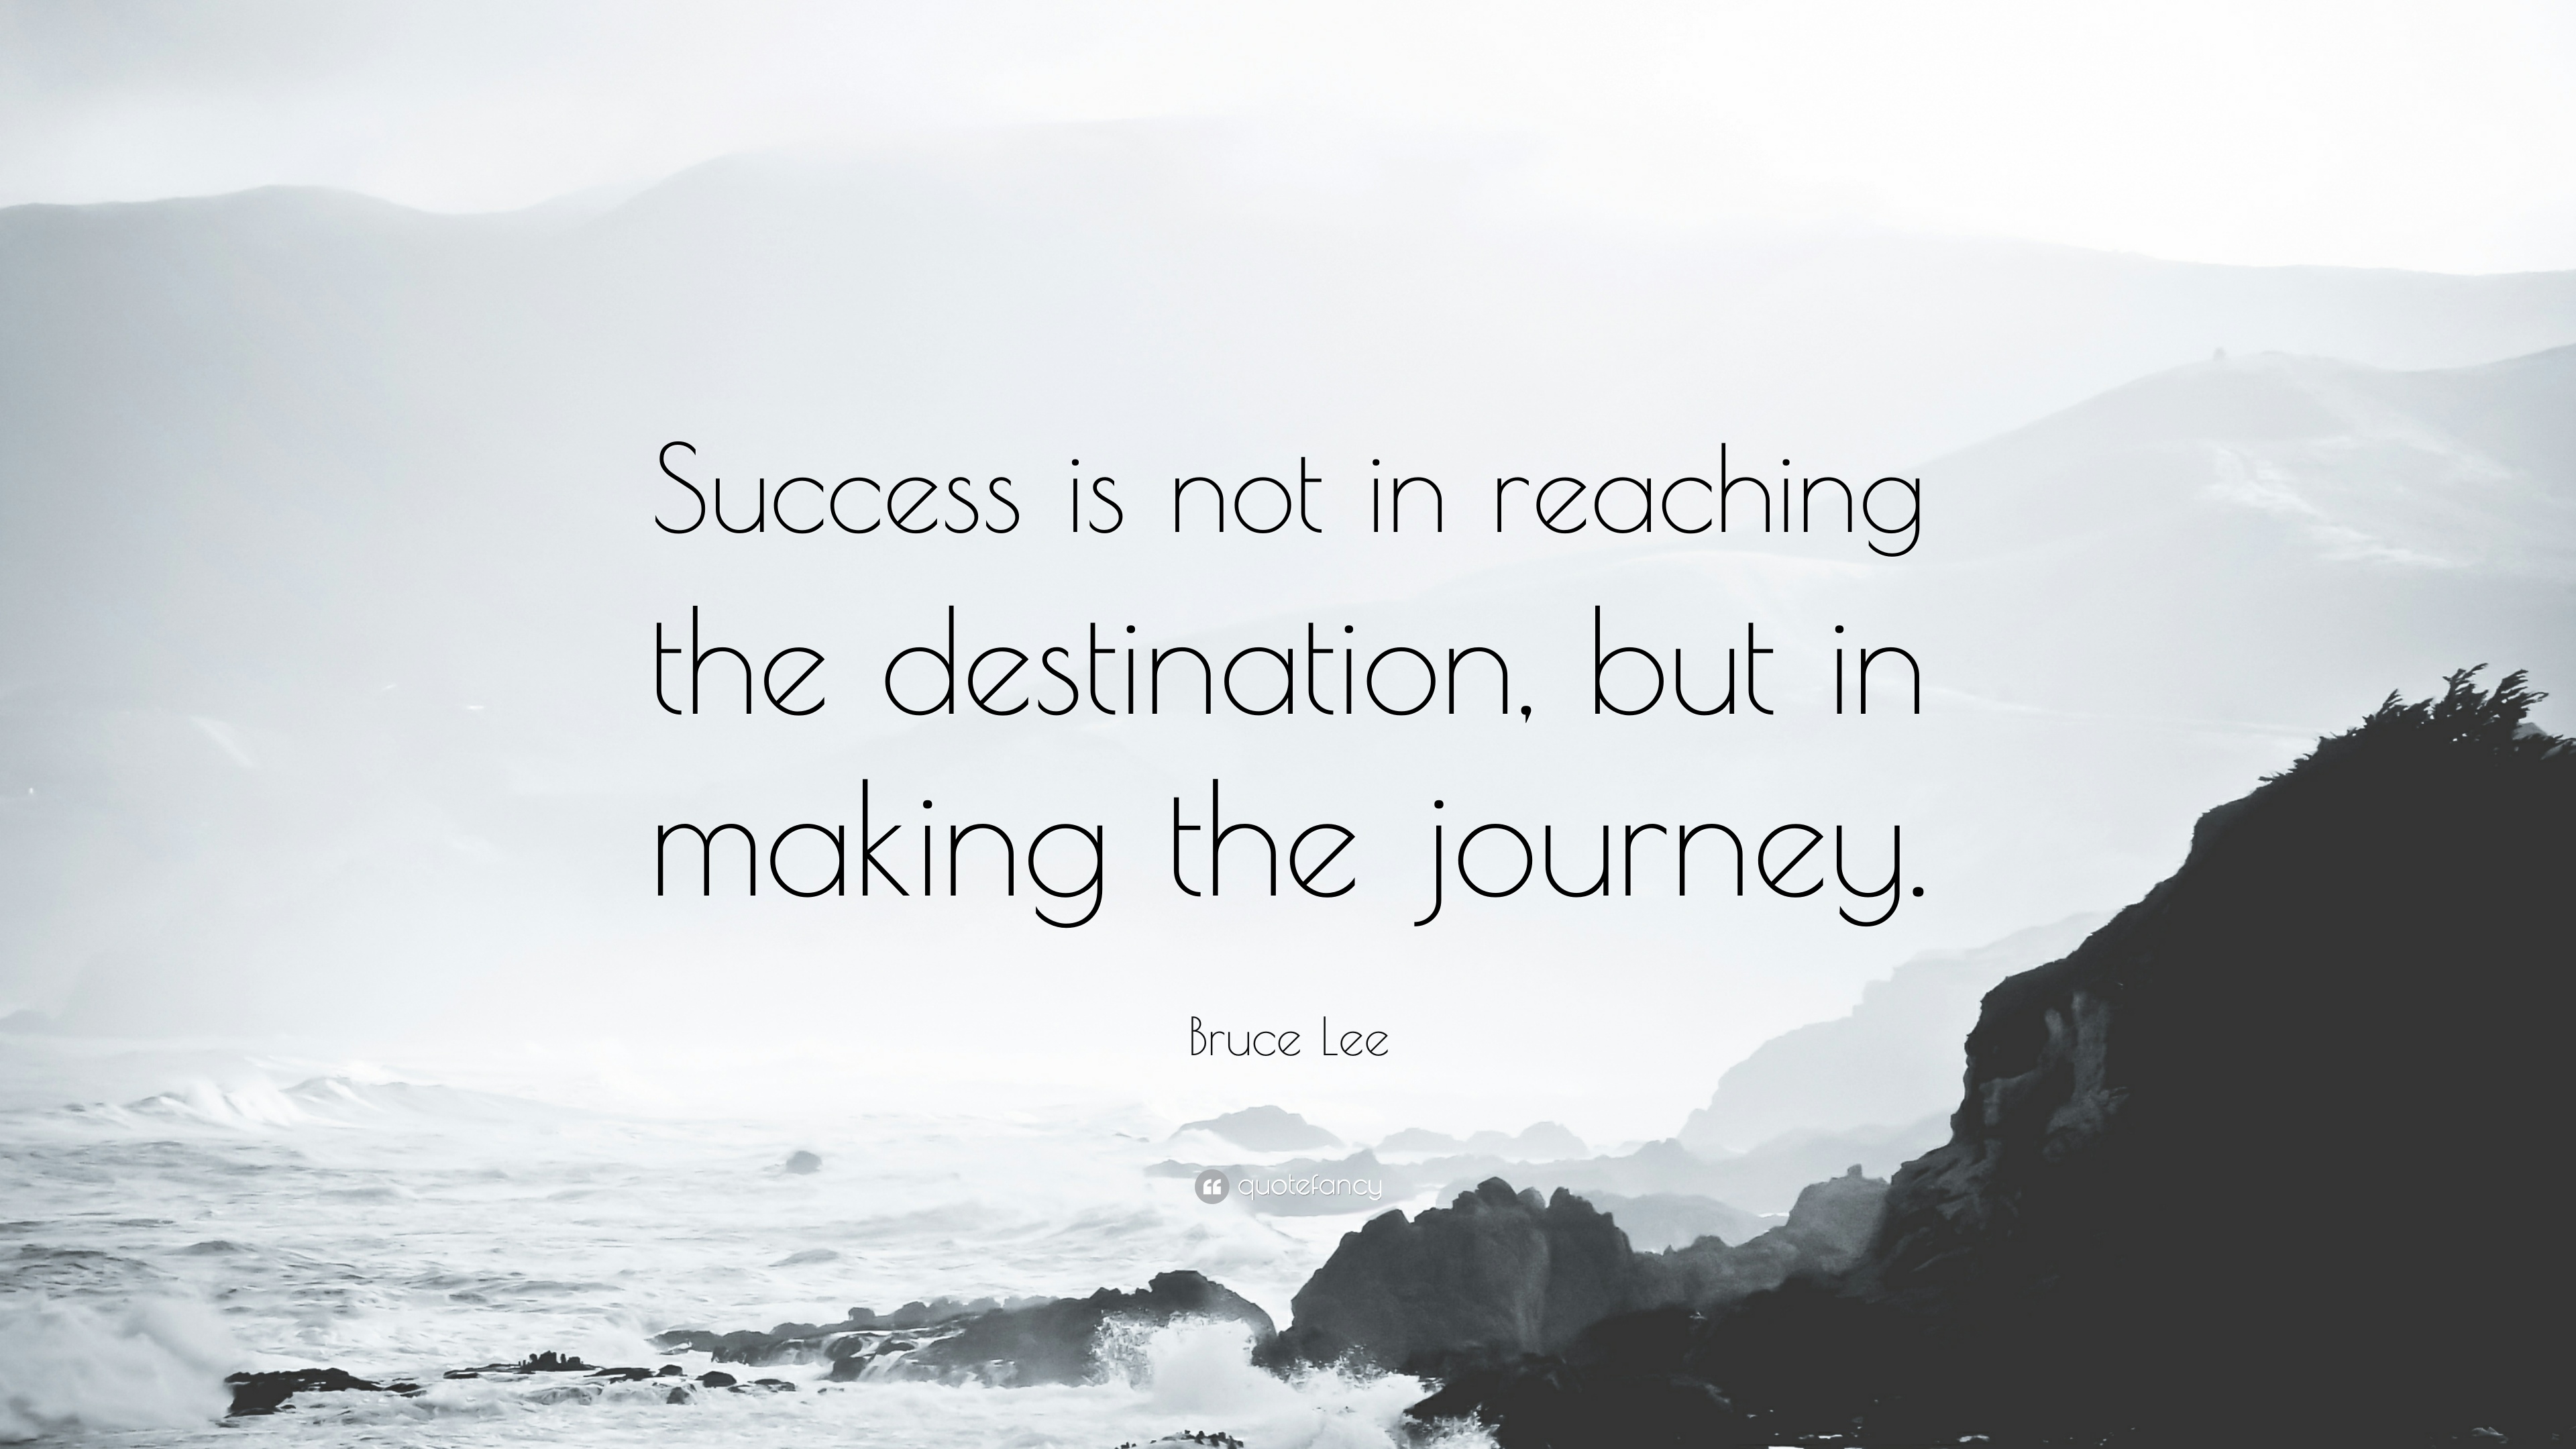 Bruce Lee Quote: “Success is not in reaching the destination, but in ...